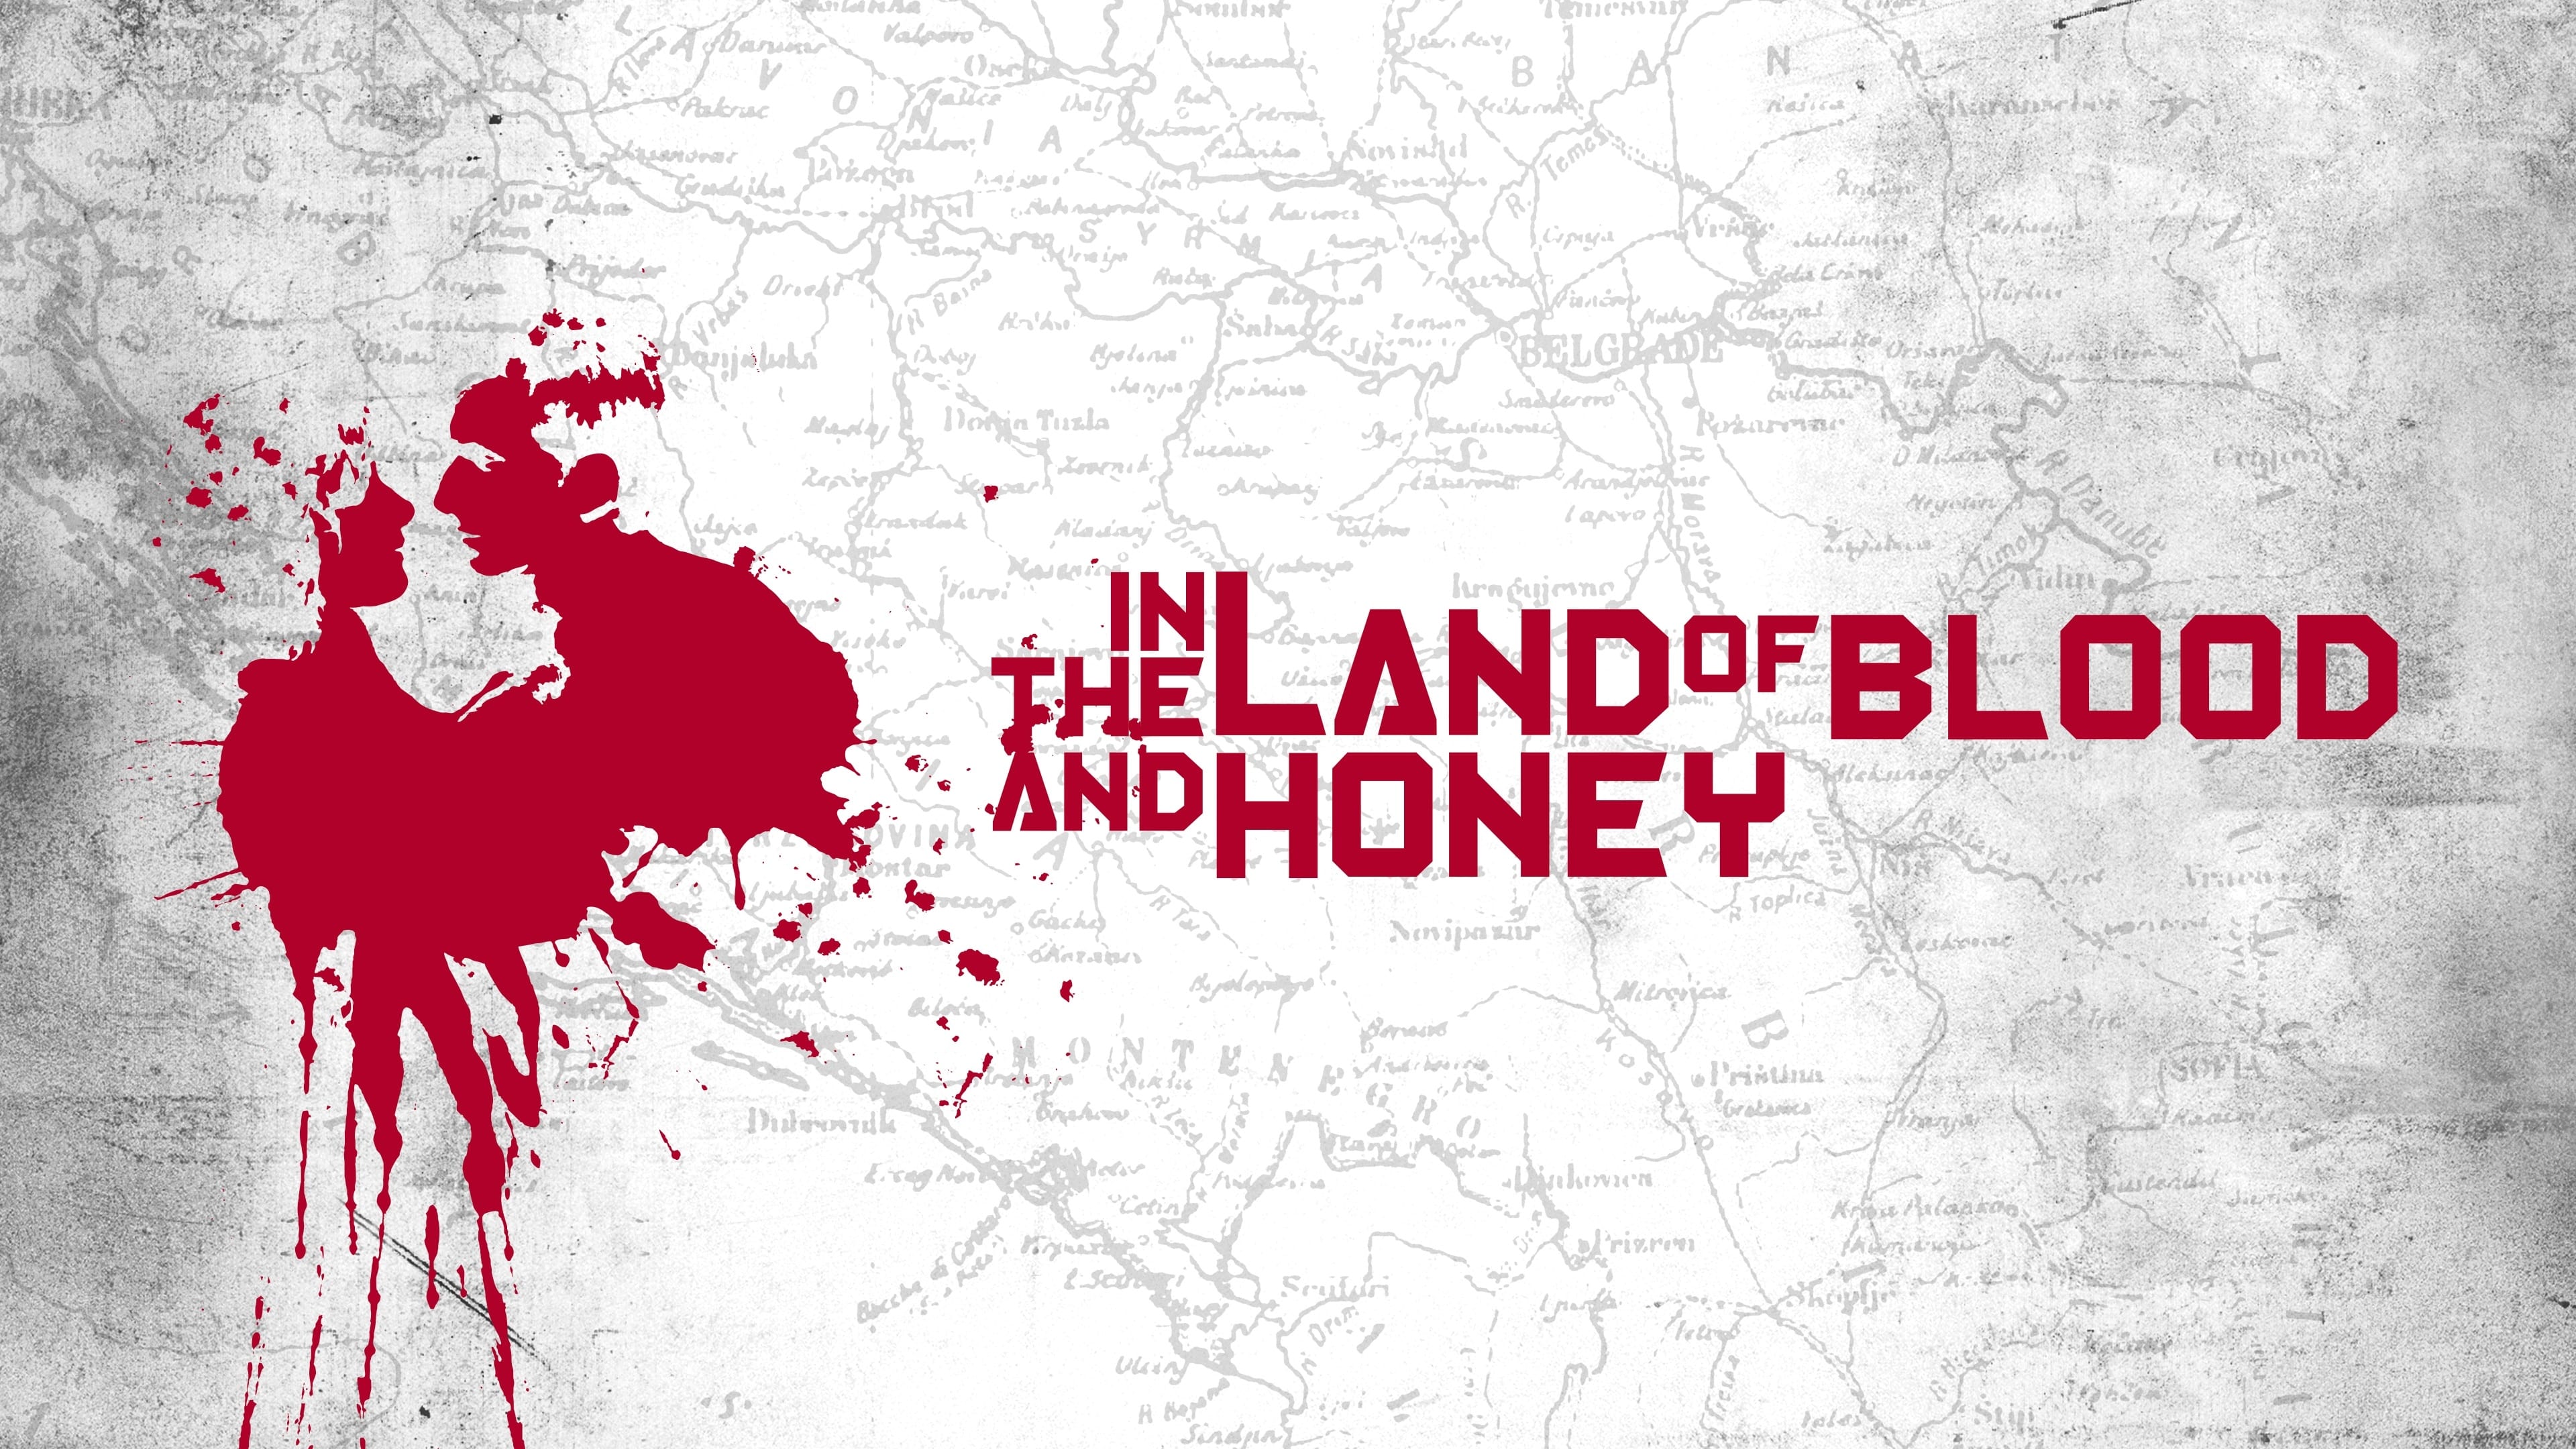 In the Land of Blood and Honey (2011)